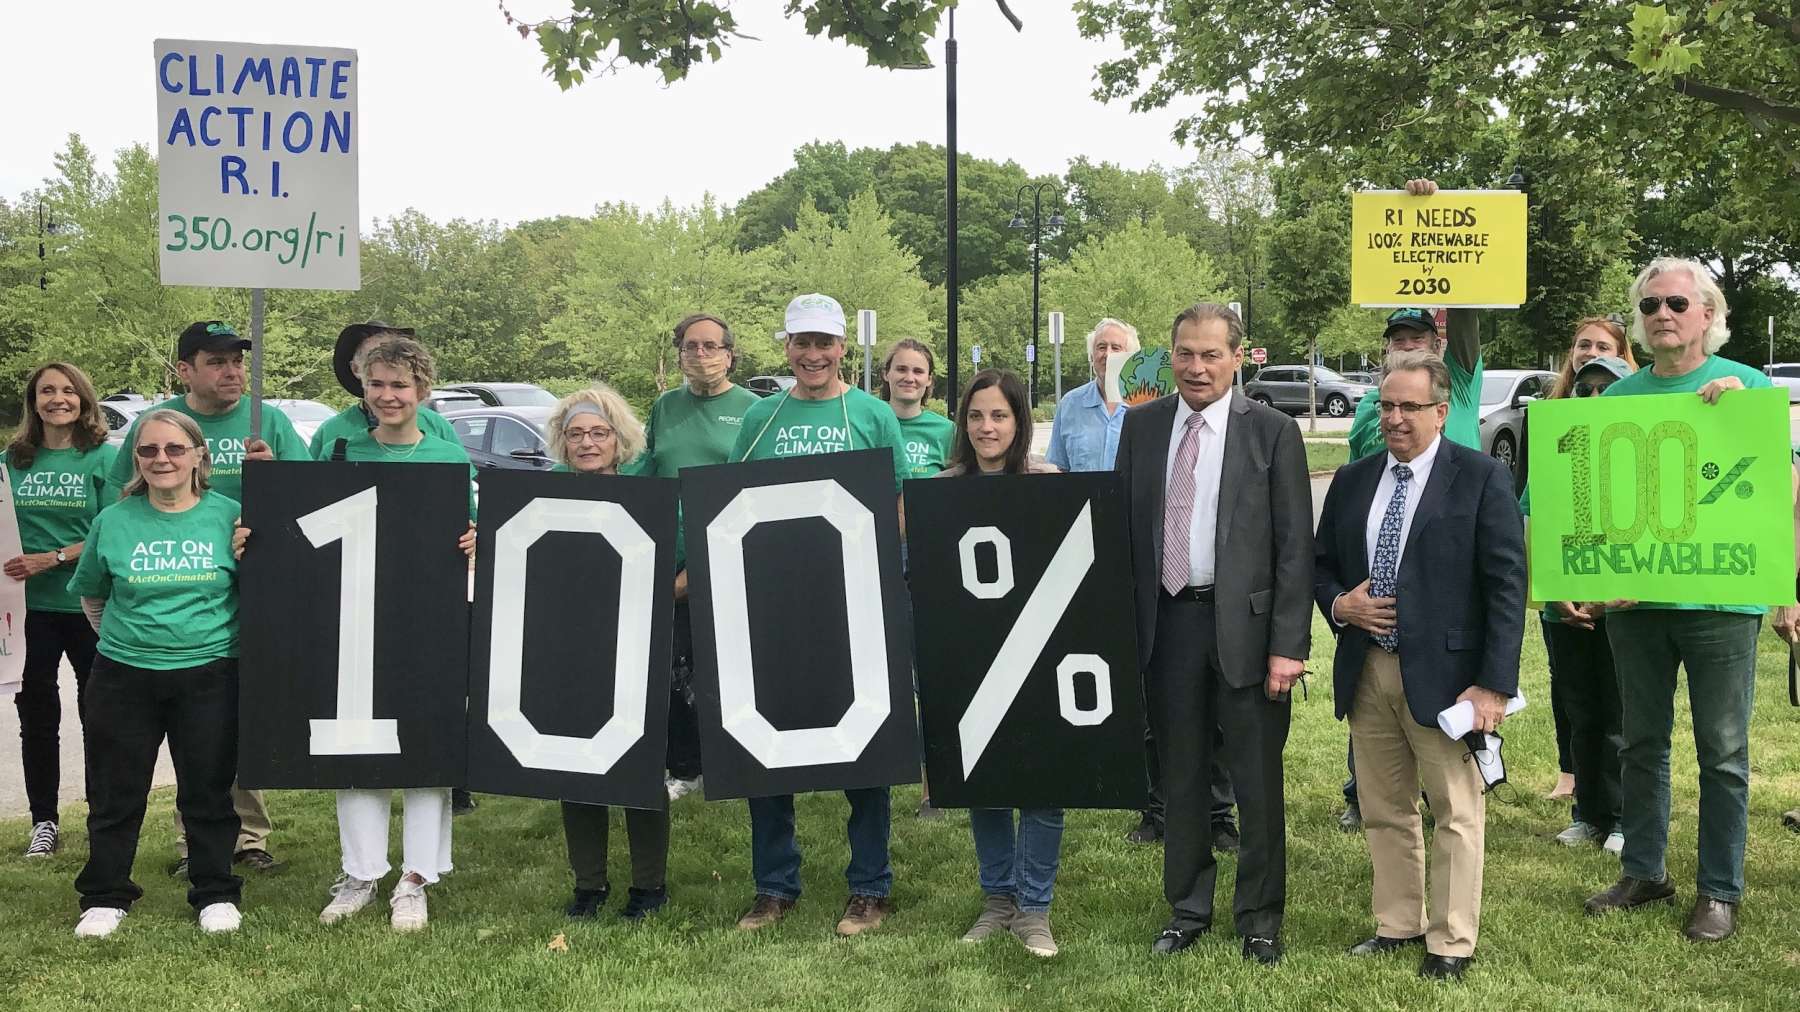 100% renewable energy by 2030: Senate President meets with Climate Action RI ahead of vote